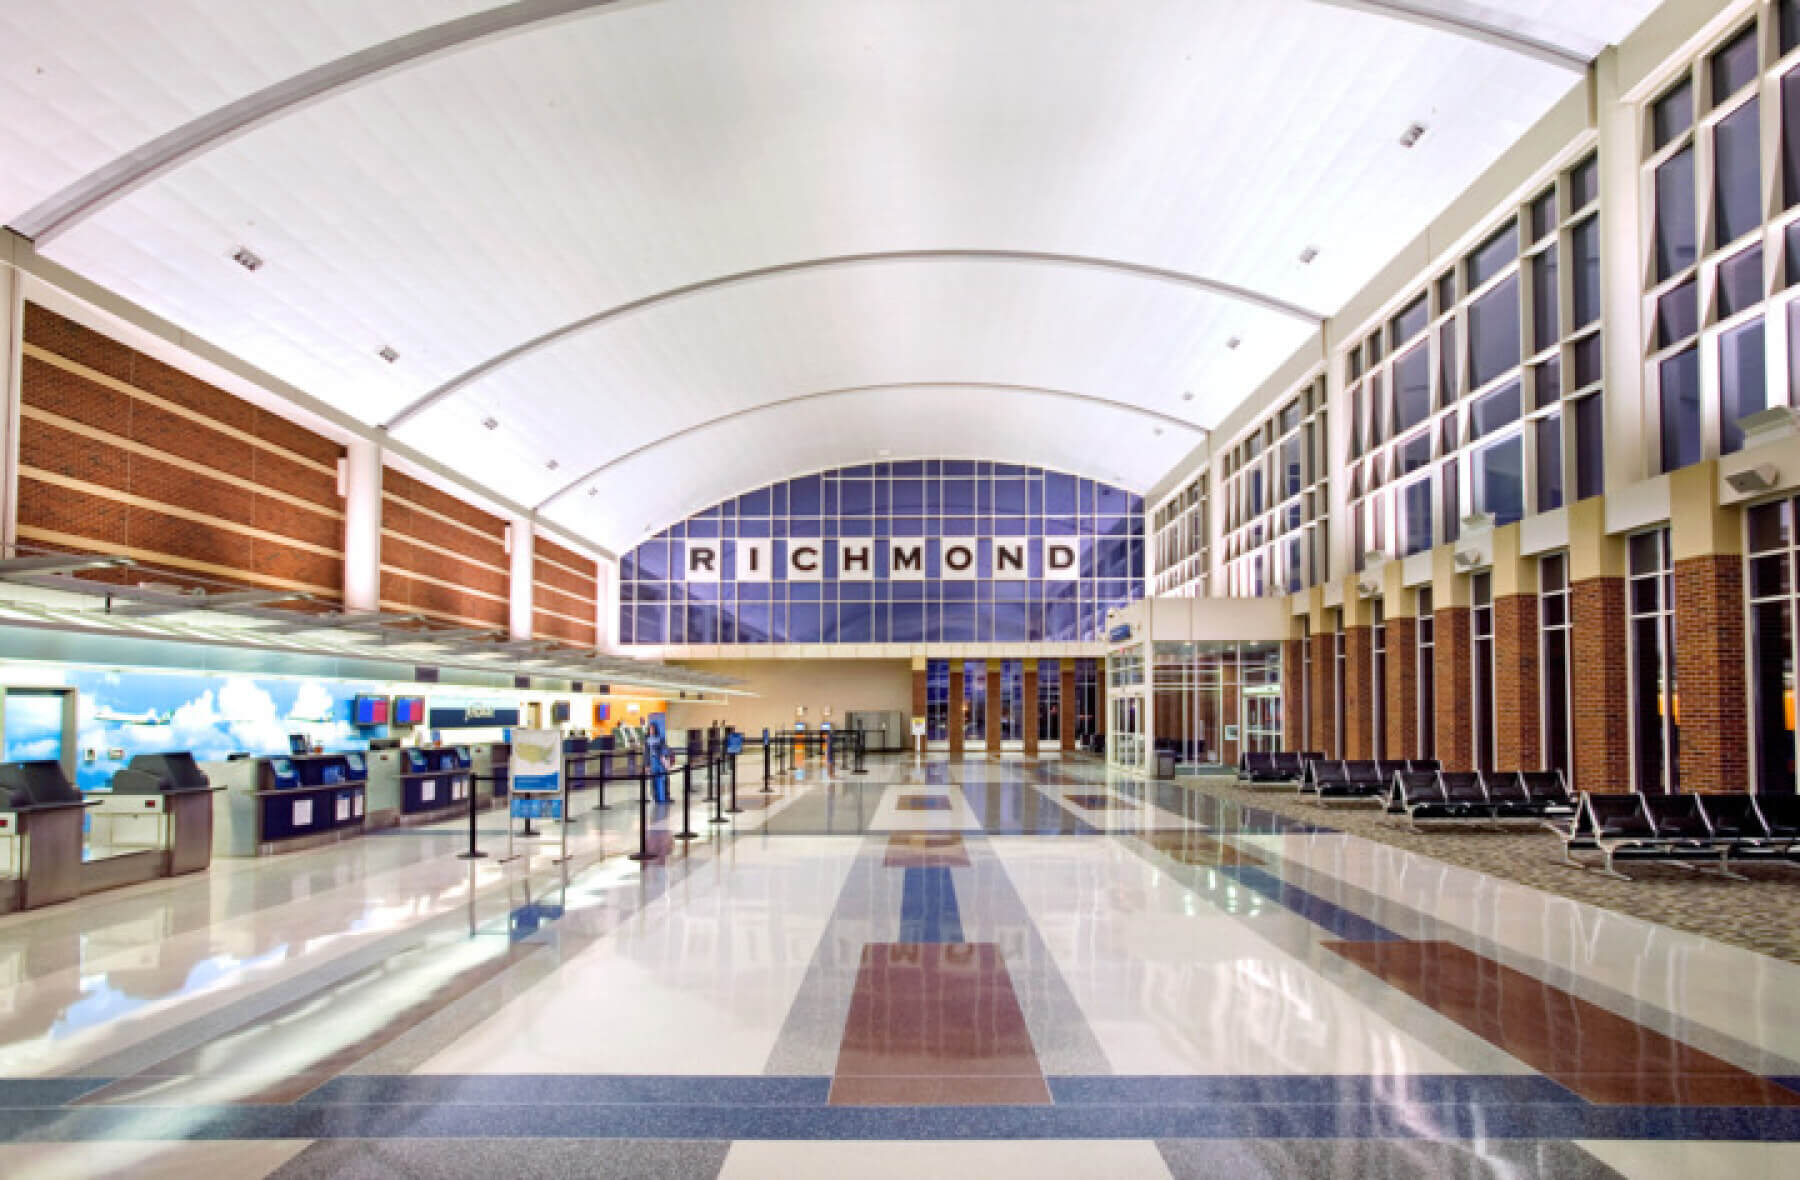 the terminal lobby and ticketing counters at Richmond International Airport